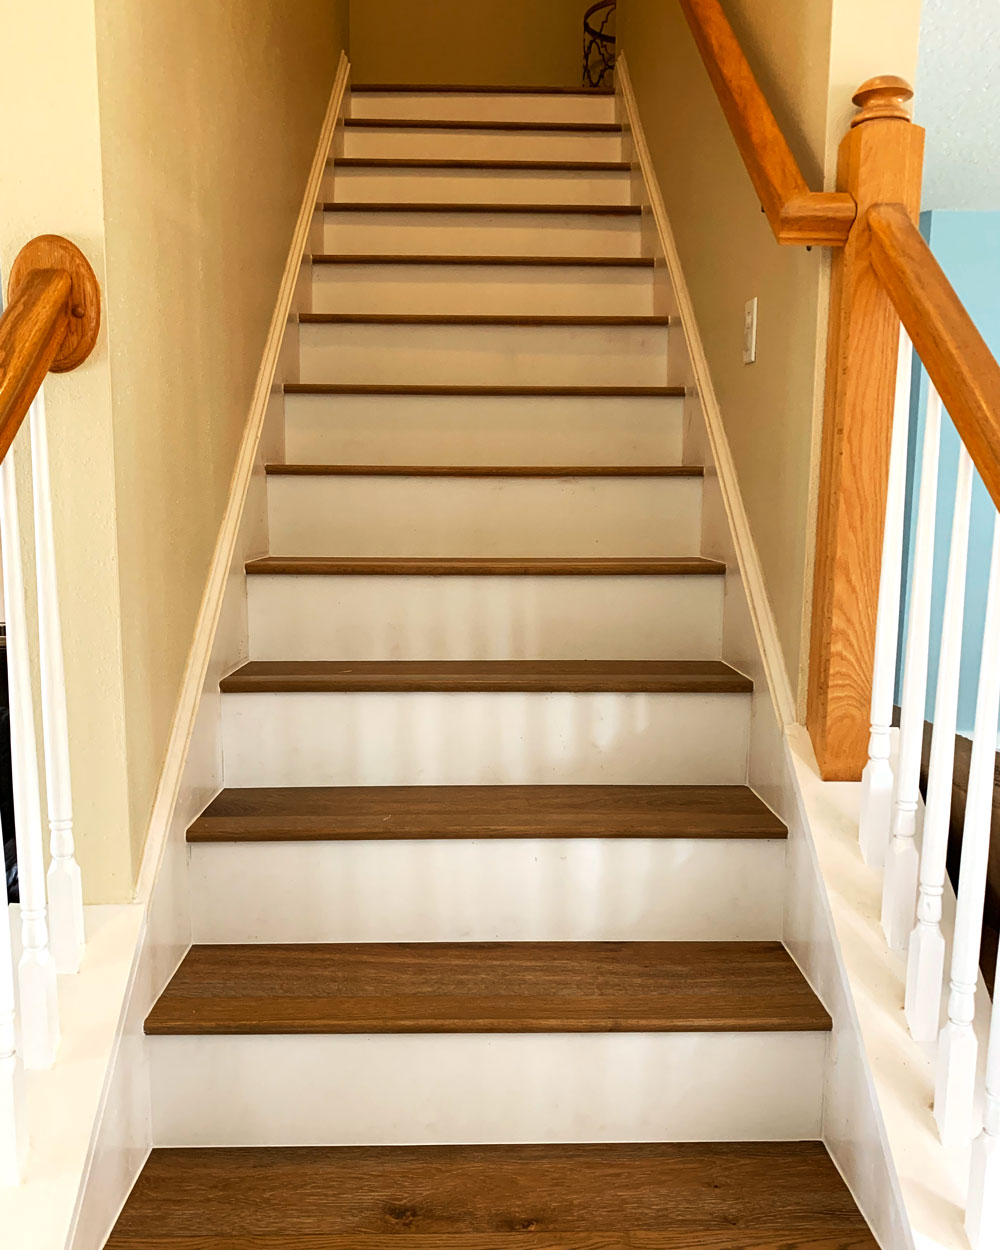 Staircase with brown hardwood planks and white risers